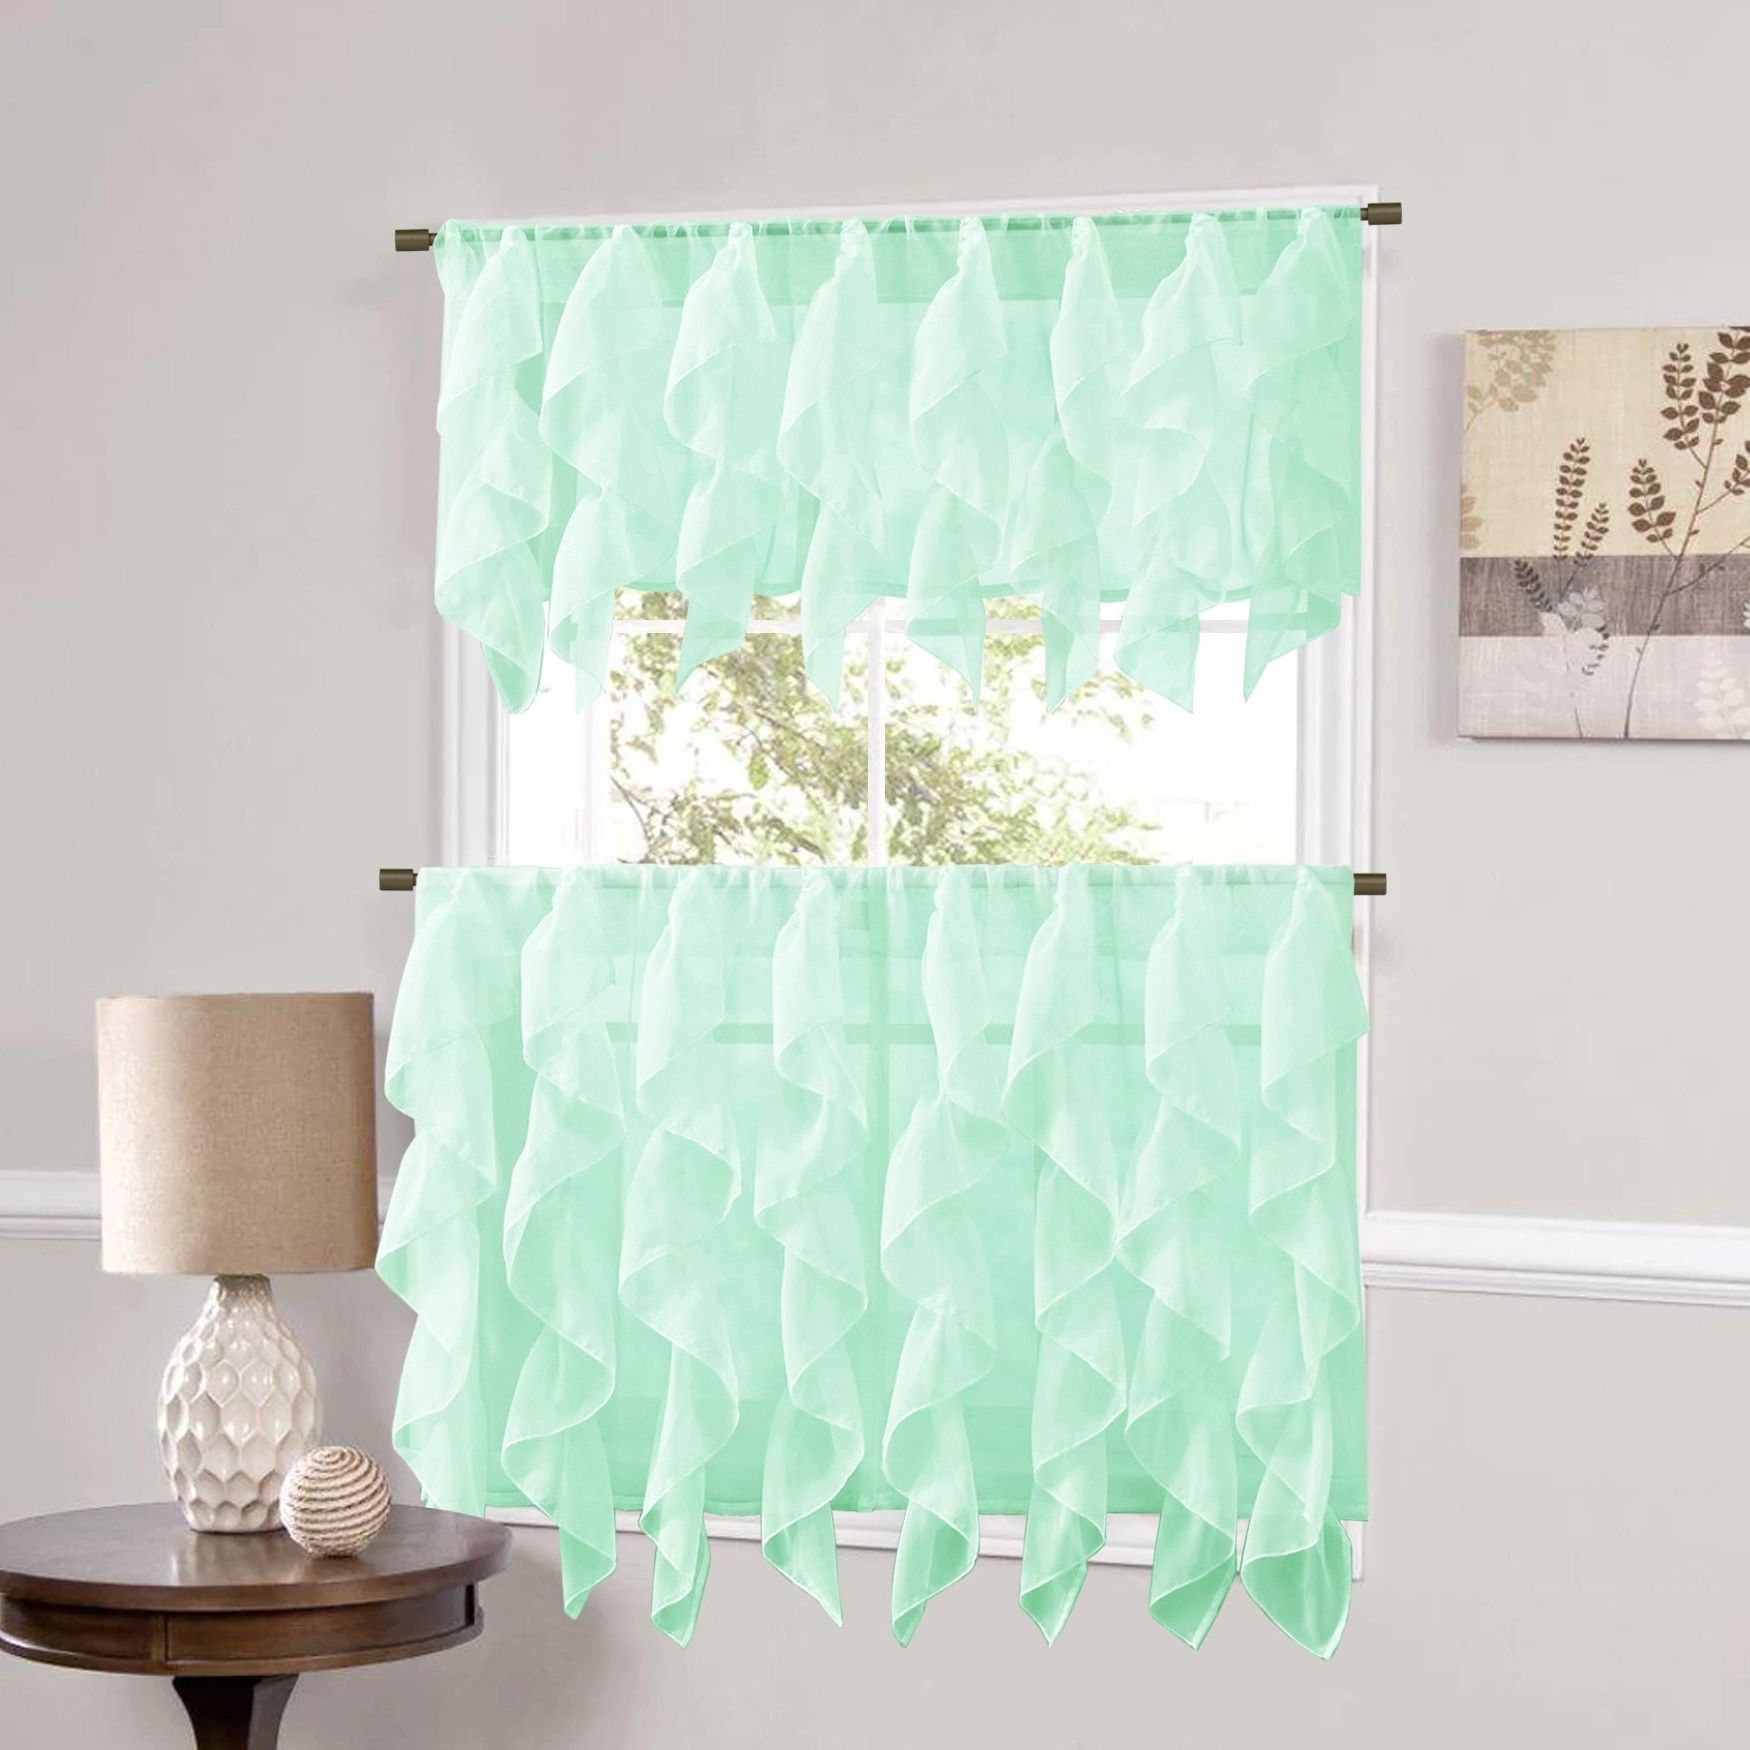 Sweet Home Collection Mint Vertical Ruffled Waterfall Valance And Curtain  Tiers Pertaining To Recent Maize Vertical Ruffled Waterfall Valance And Curtain Tiers (View 1 of 20)